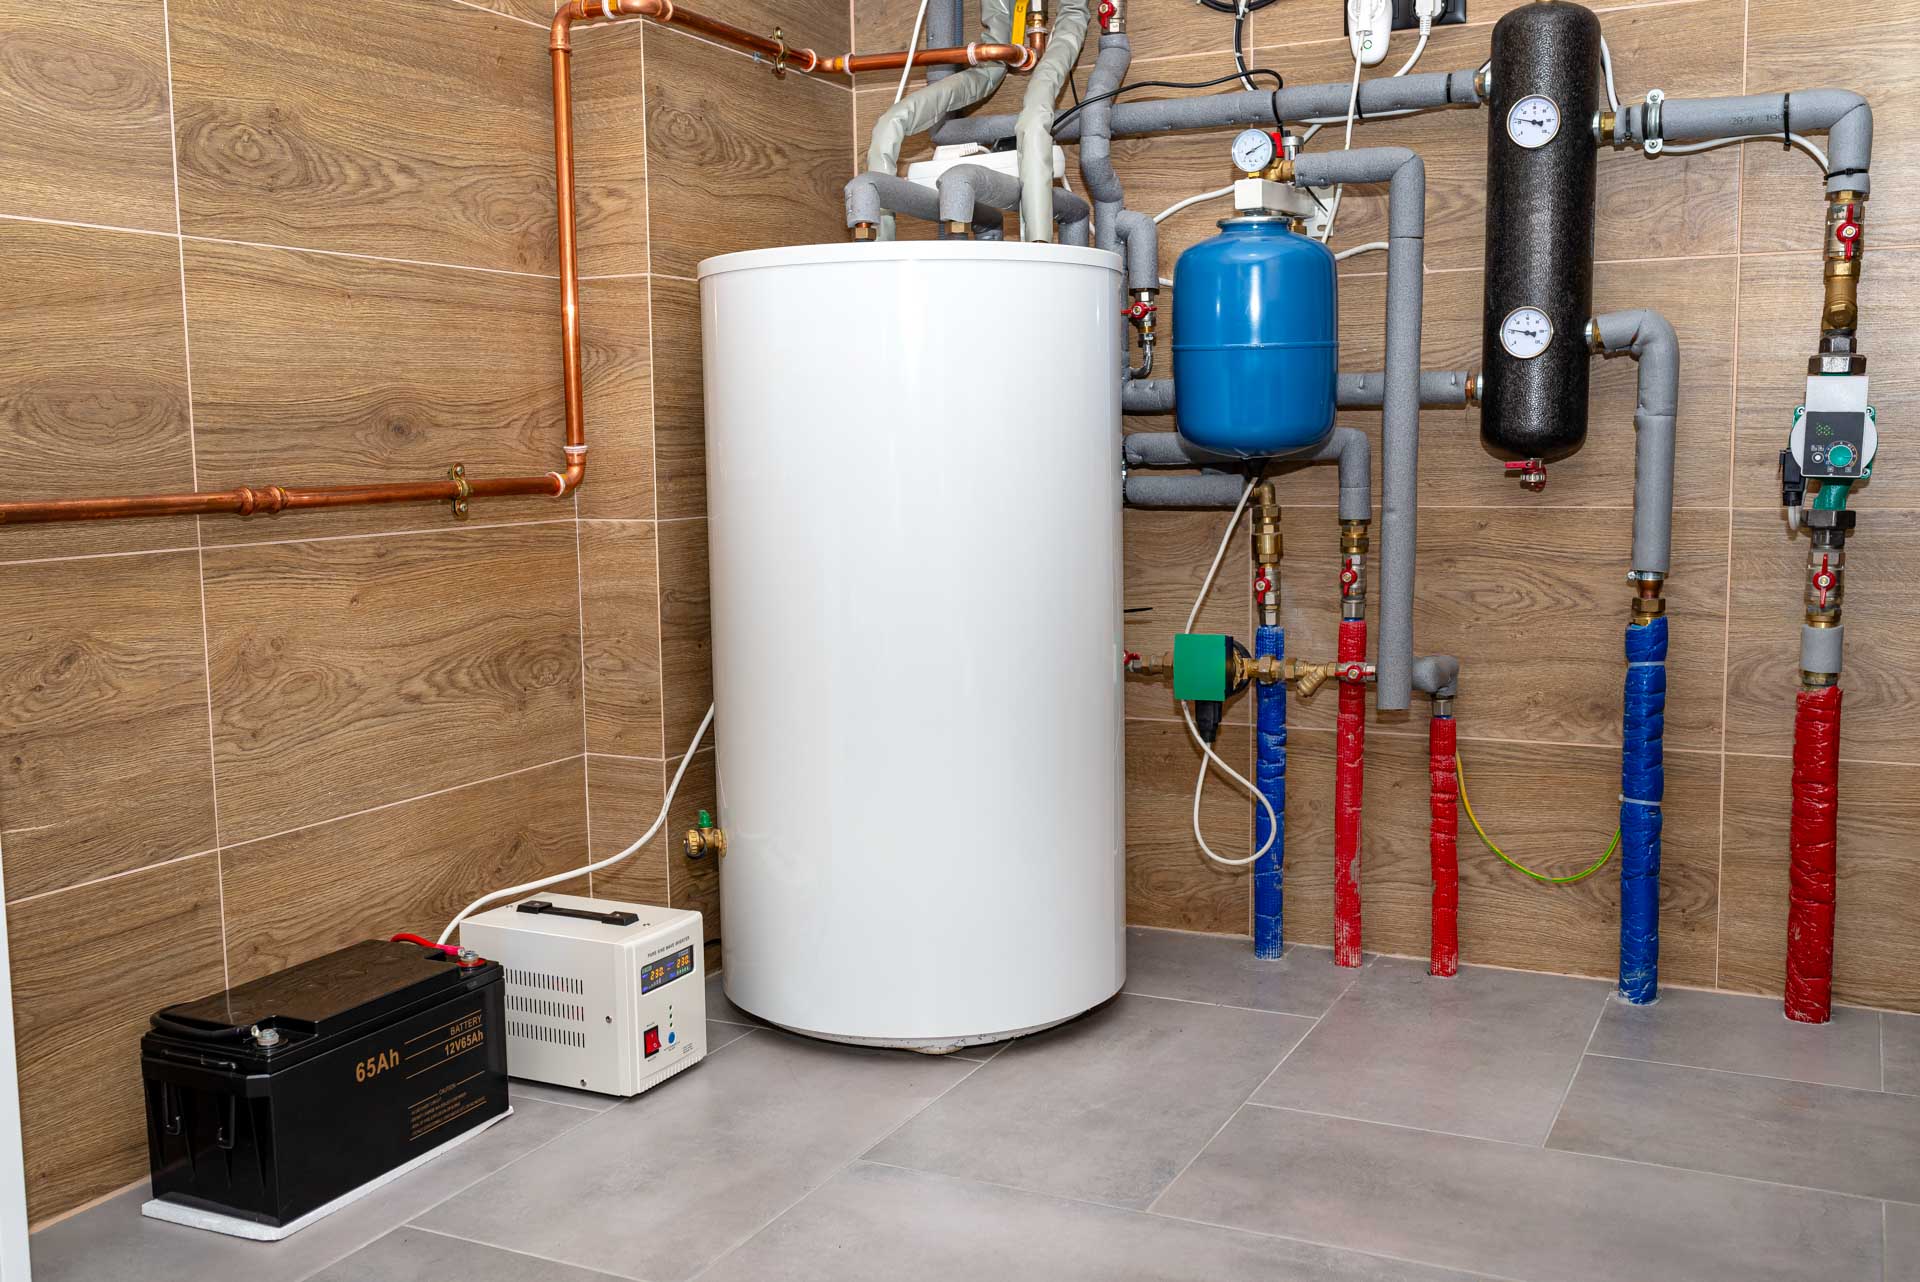 A home kitchen heating and cooling system with a white water heater, copper pipes, a blue expansion tank, various gauges, and an electrical unit on the floor.